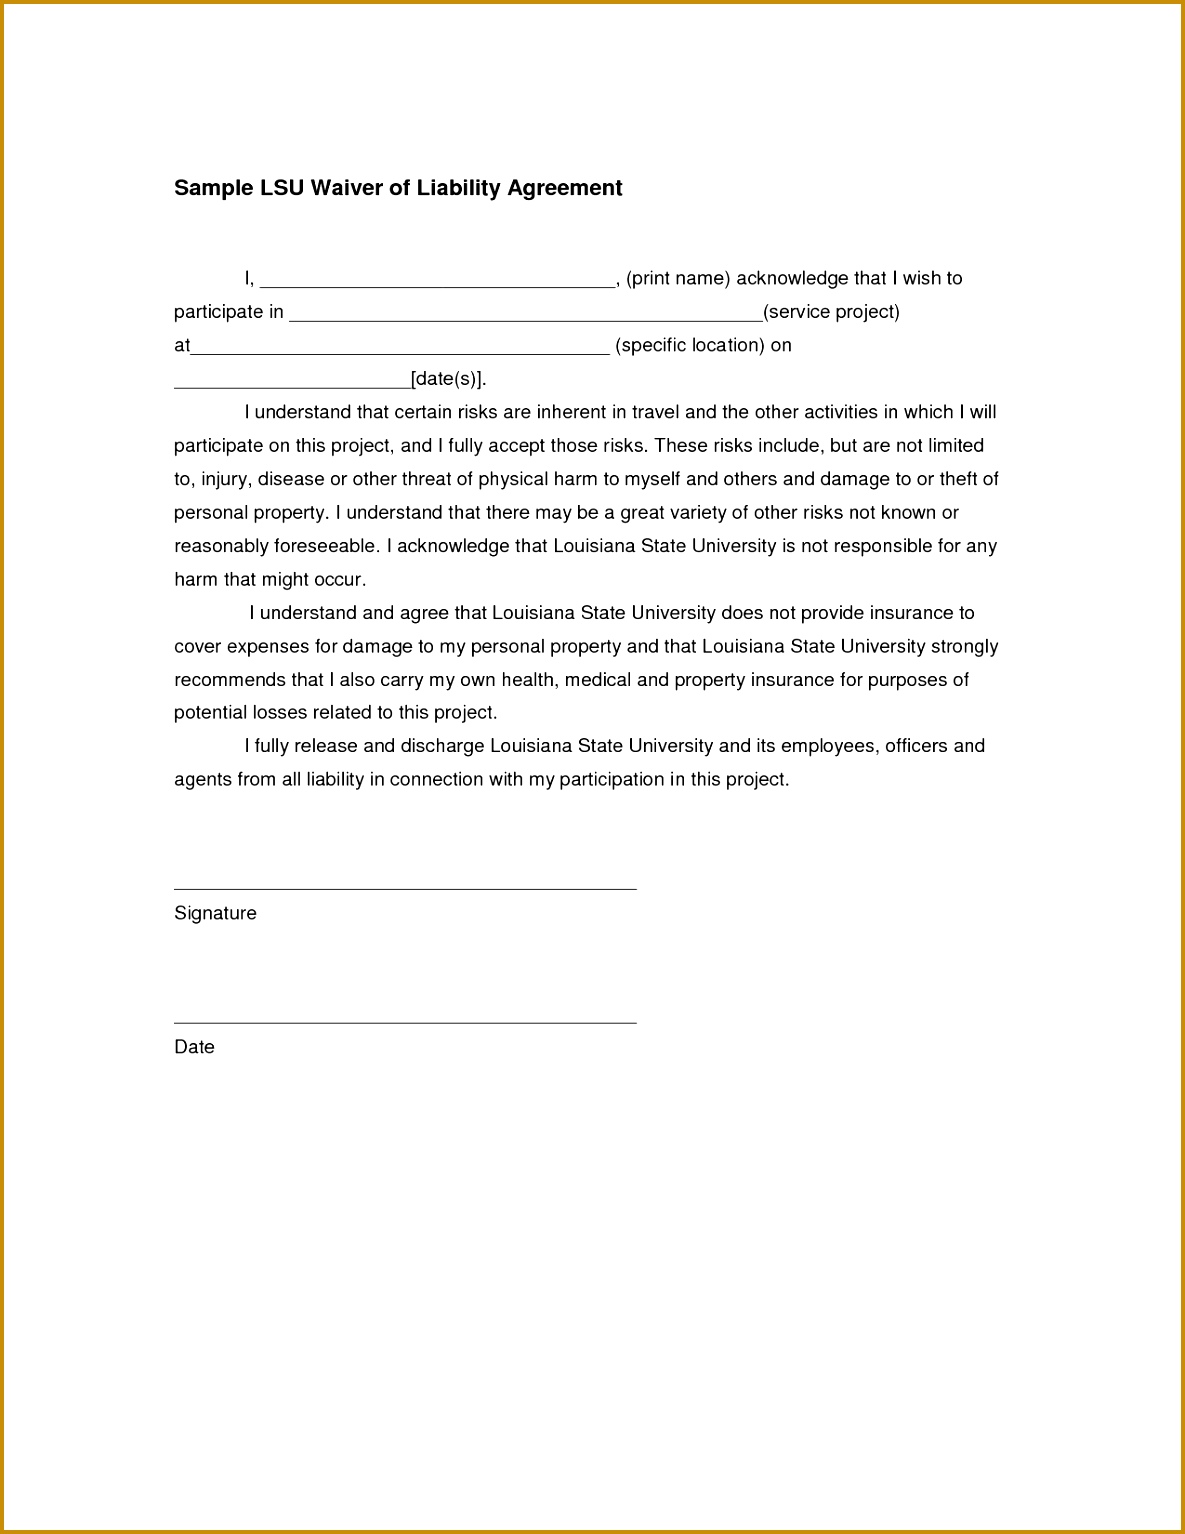 Liability Release Form Template in images waiver of liability sample 15341185